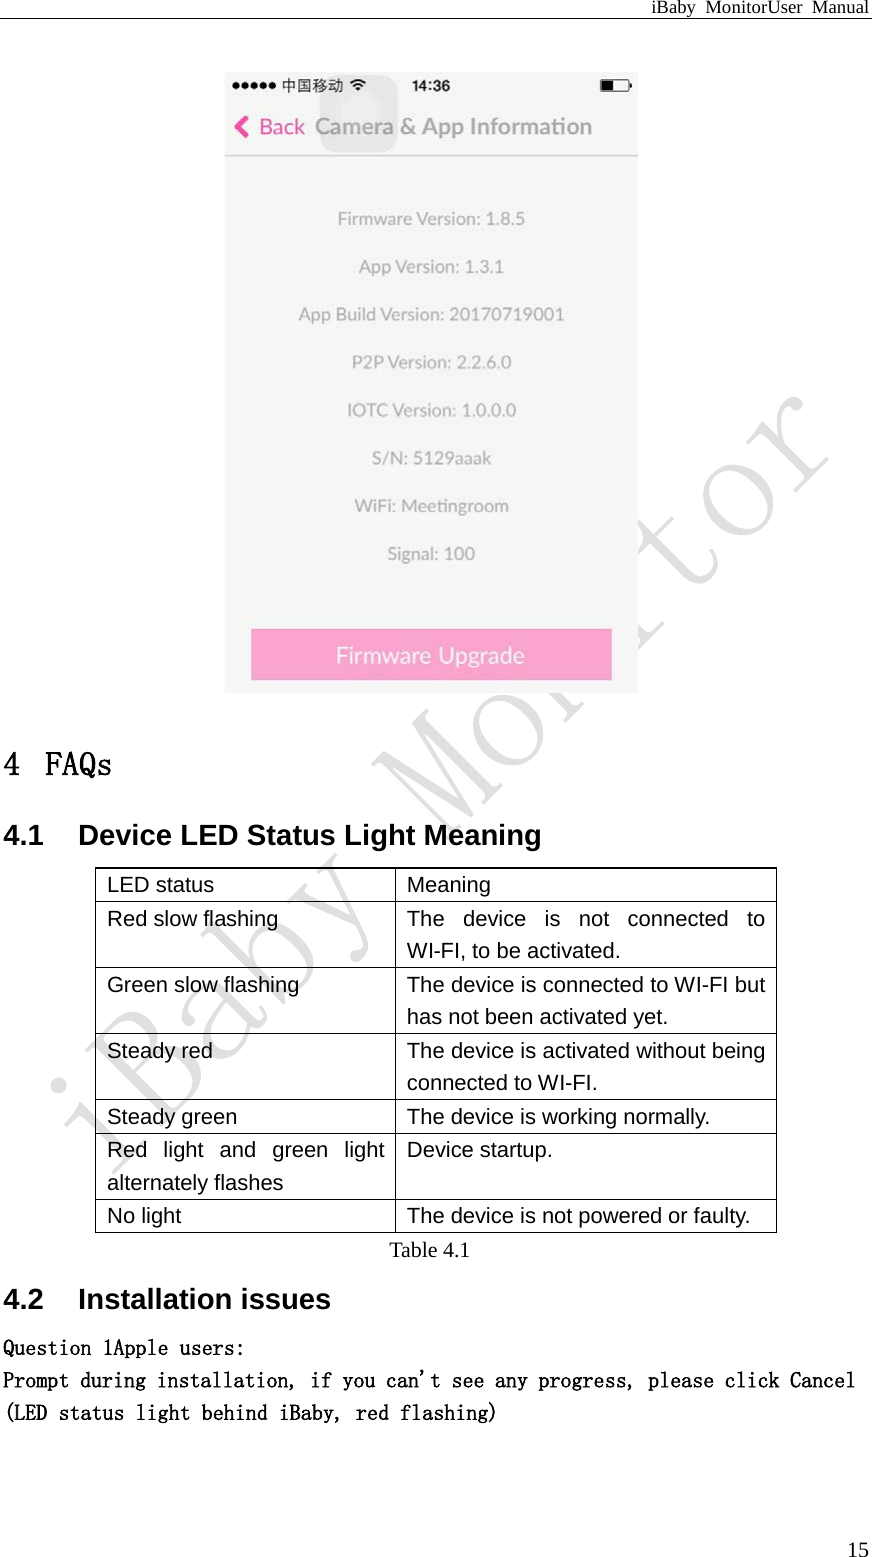 iBaby MonitorUser Manual  15  4 FAQs 4.1 Device LED Status Light Meaning LED status Meaning Red slow flashing The  device is not connected to WI-FI, to be activated. Green slow flashing The device is connected to WI-FI but has not been activated yet. Steady red The device is activated without being connected to WI-FI. Steady green The device is working normally. Red light and  green light alternately flashes Device startup. No light The device is not powered or faulty. Table 4.1 4.2 Installation issues Question 1Apple users: Prompt during installation, if you can&apos;t see any progress, please click Cancel (LED status light behind iBaby, red flashing)